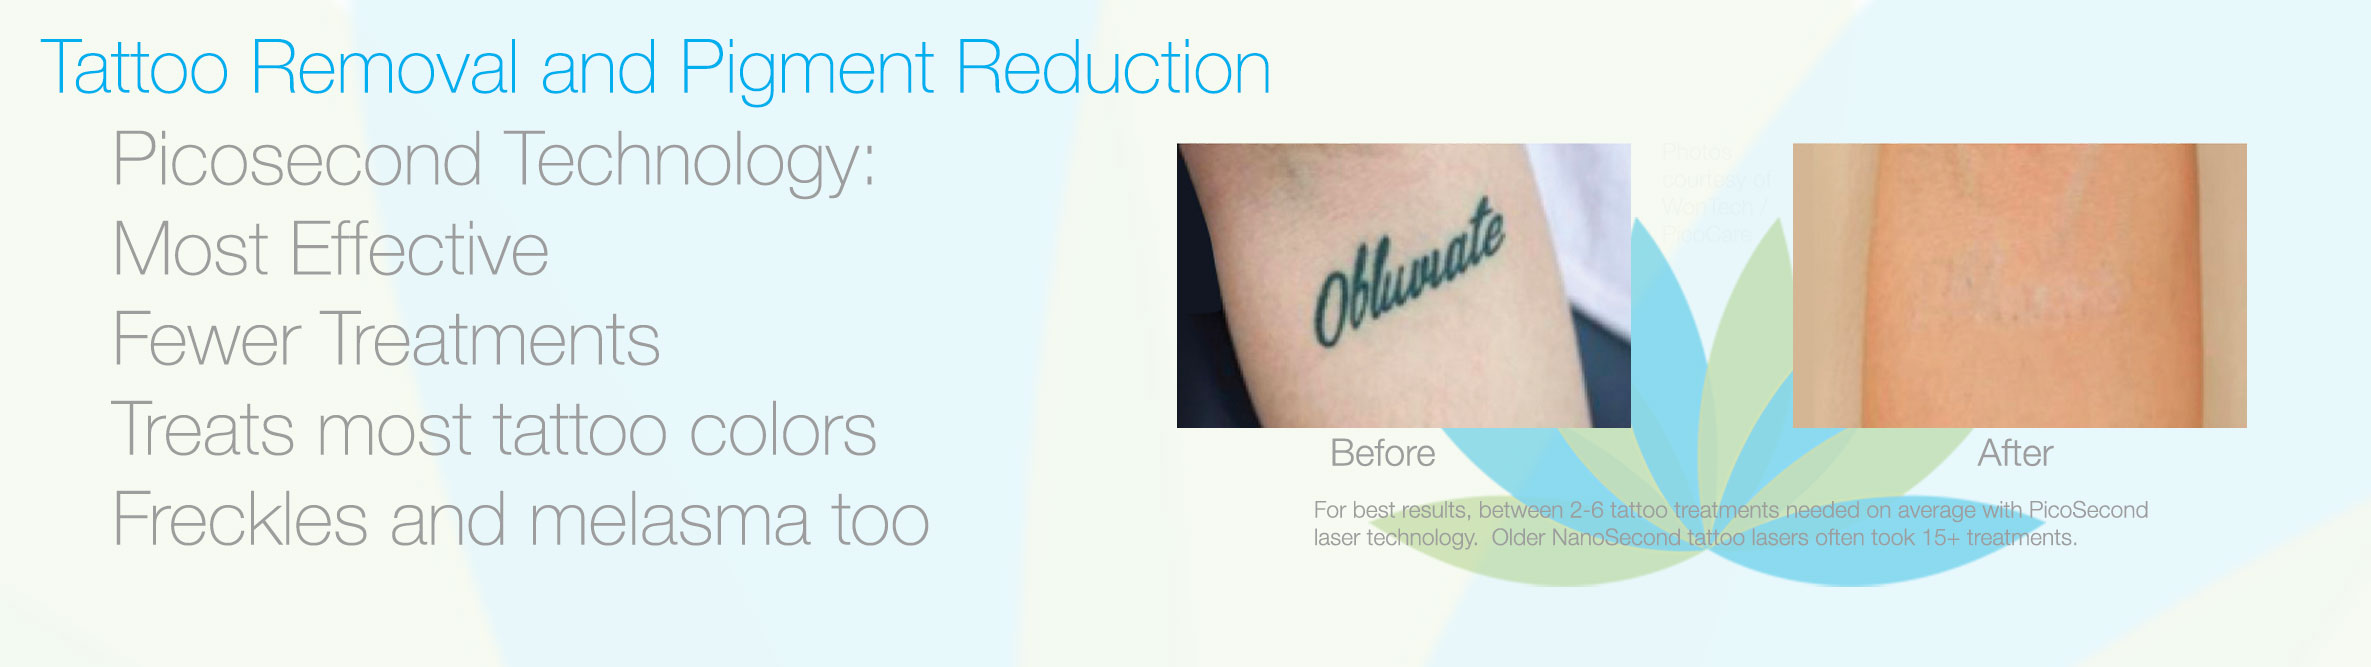 Laser Tattoo Removal and Laser Pigment Reduction at Bravia Dermatology